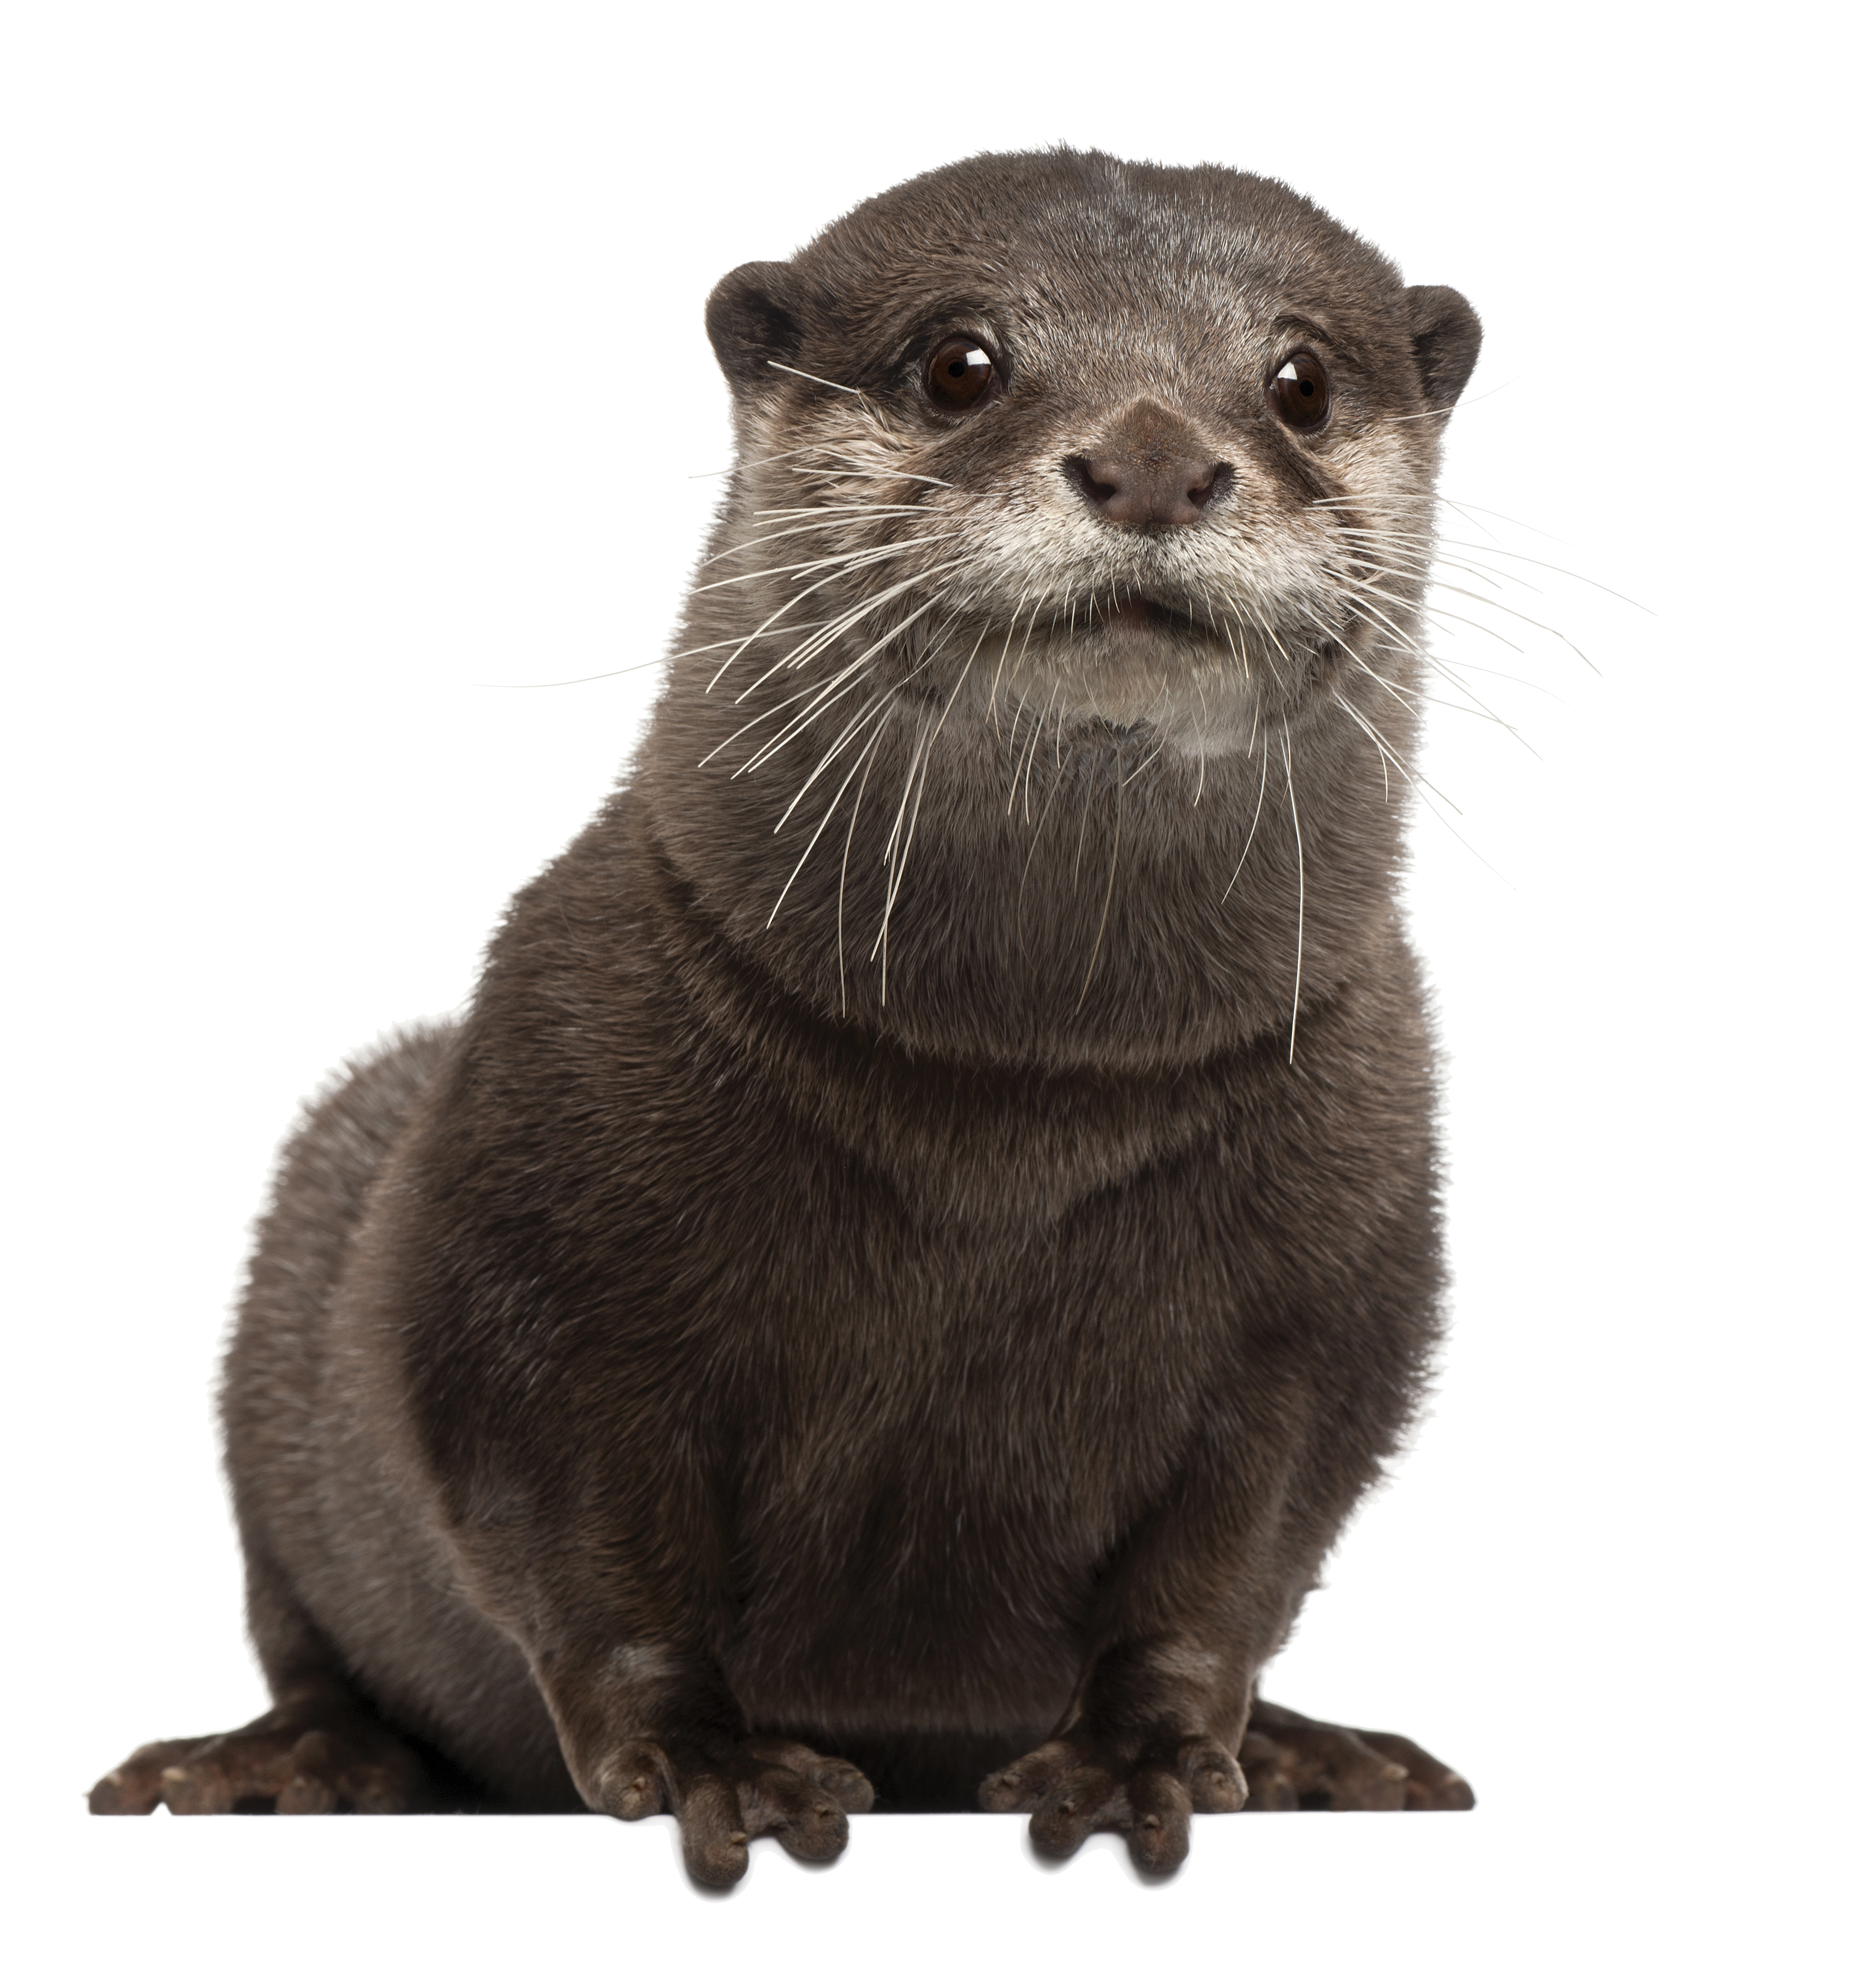 File:Otter up.png